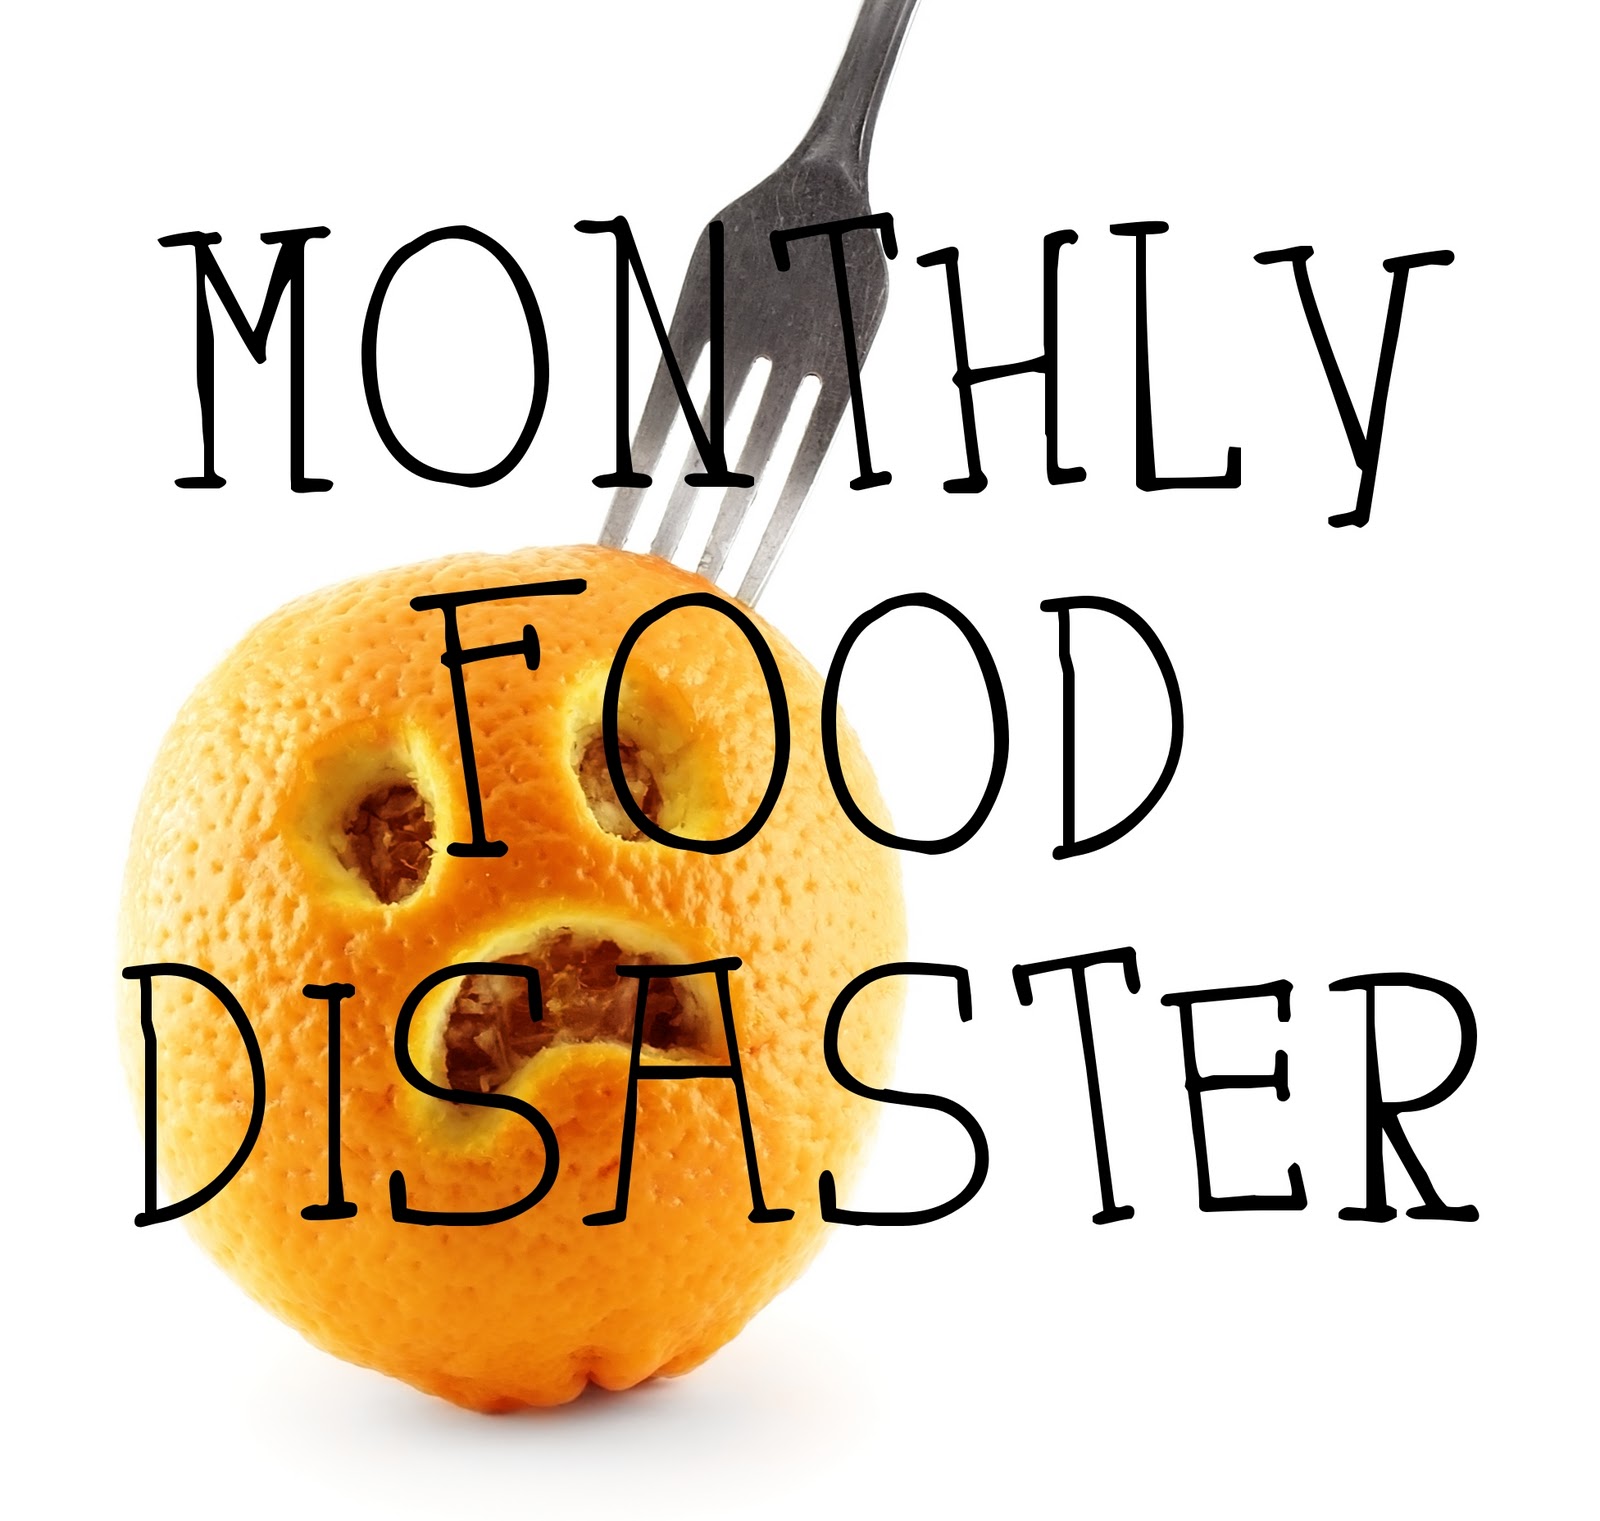 ”Monthly Food Disaster”